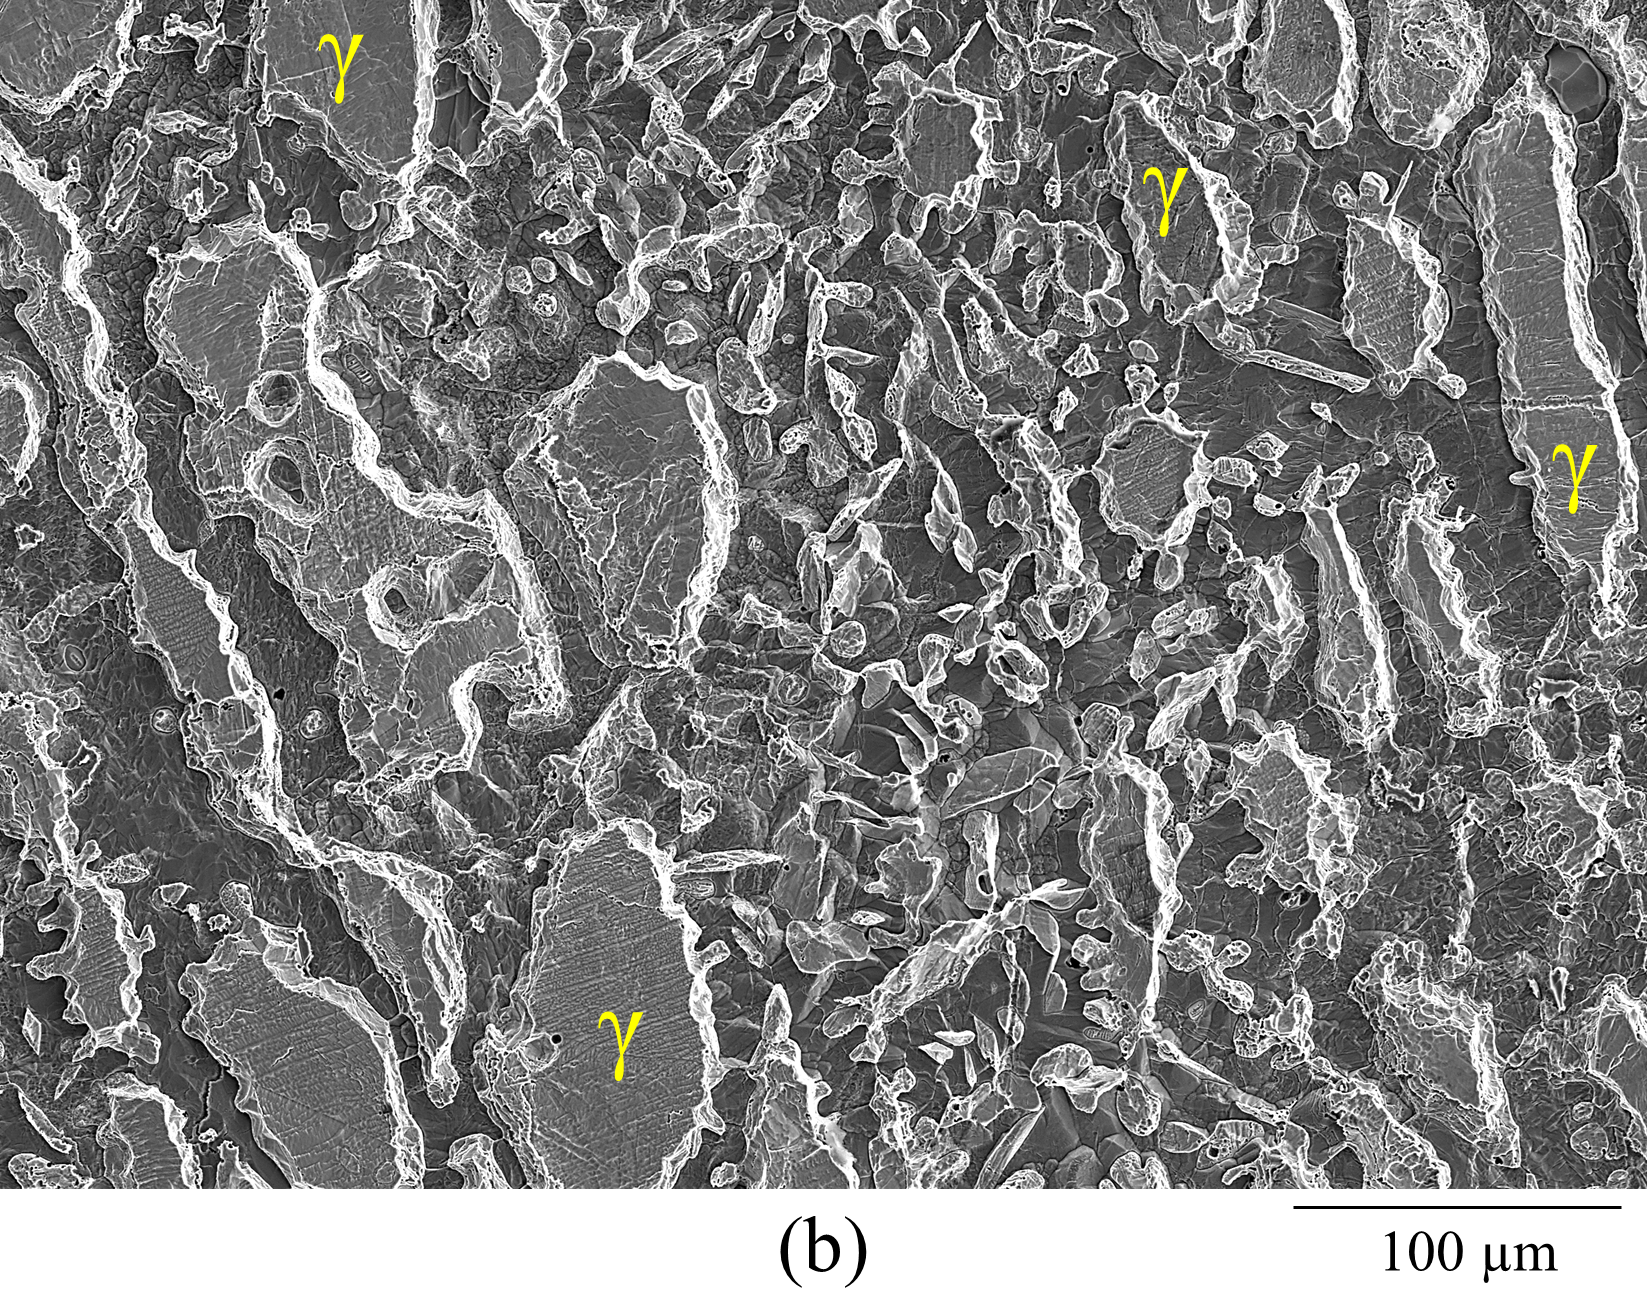 Figure 1b. SEM secondary electron images of (b) UNS S39274 specimens after the anodic potentiodynamic polarization in a 7 M LiCl solution at 60 °C. In the pictures, the austenite phase (γ) is indicated. The other phase is ferrite (α).